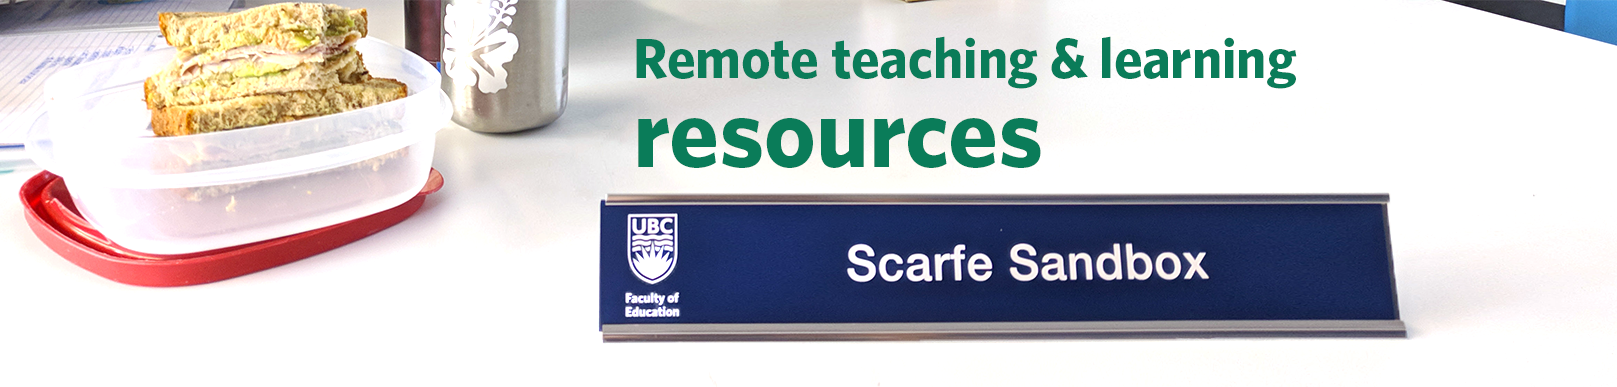 Remote Teaching & Learning banner